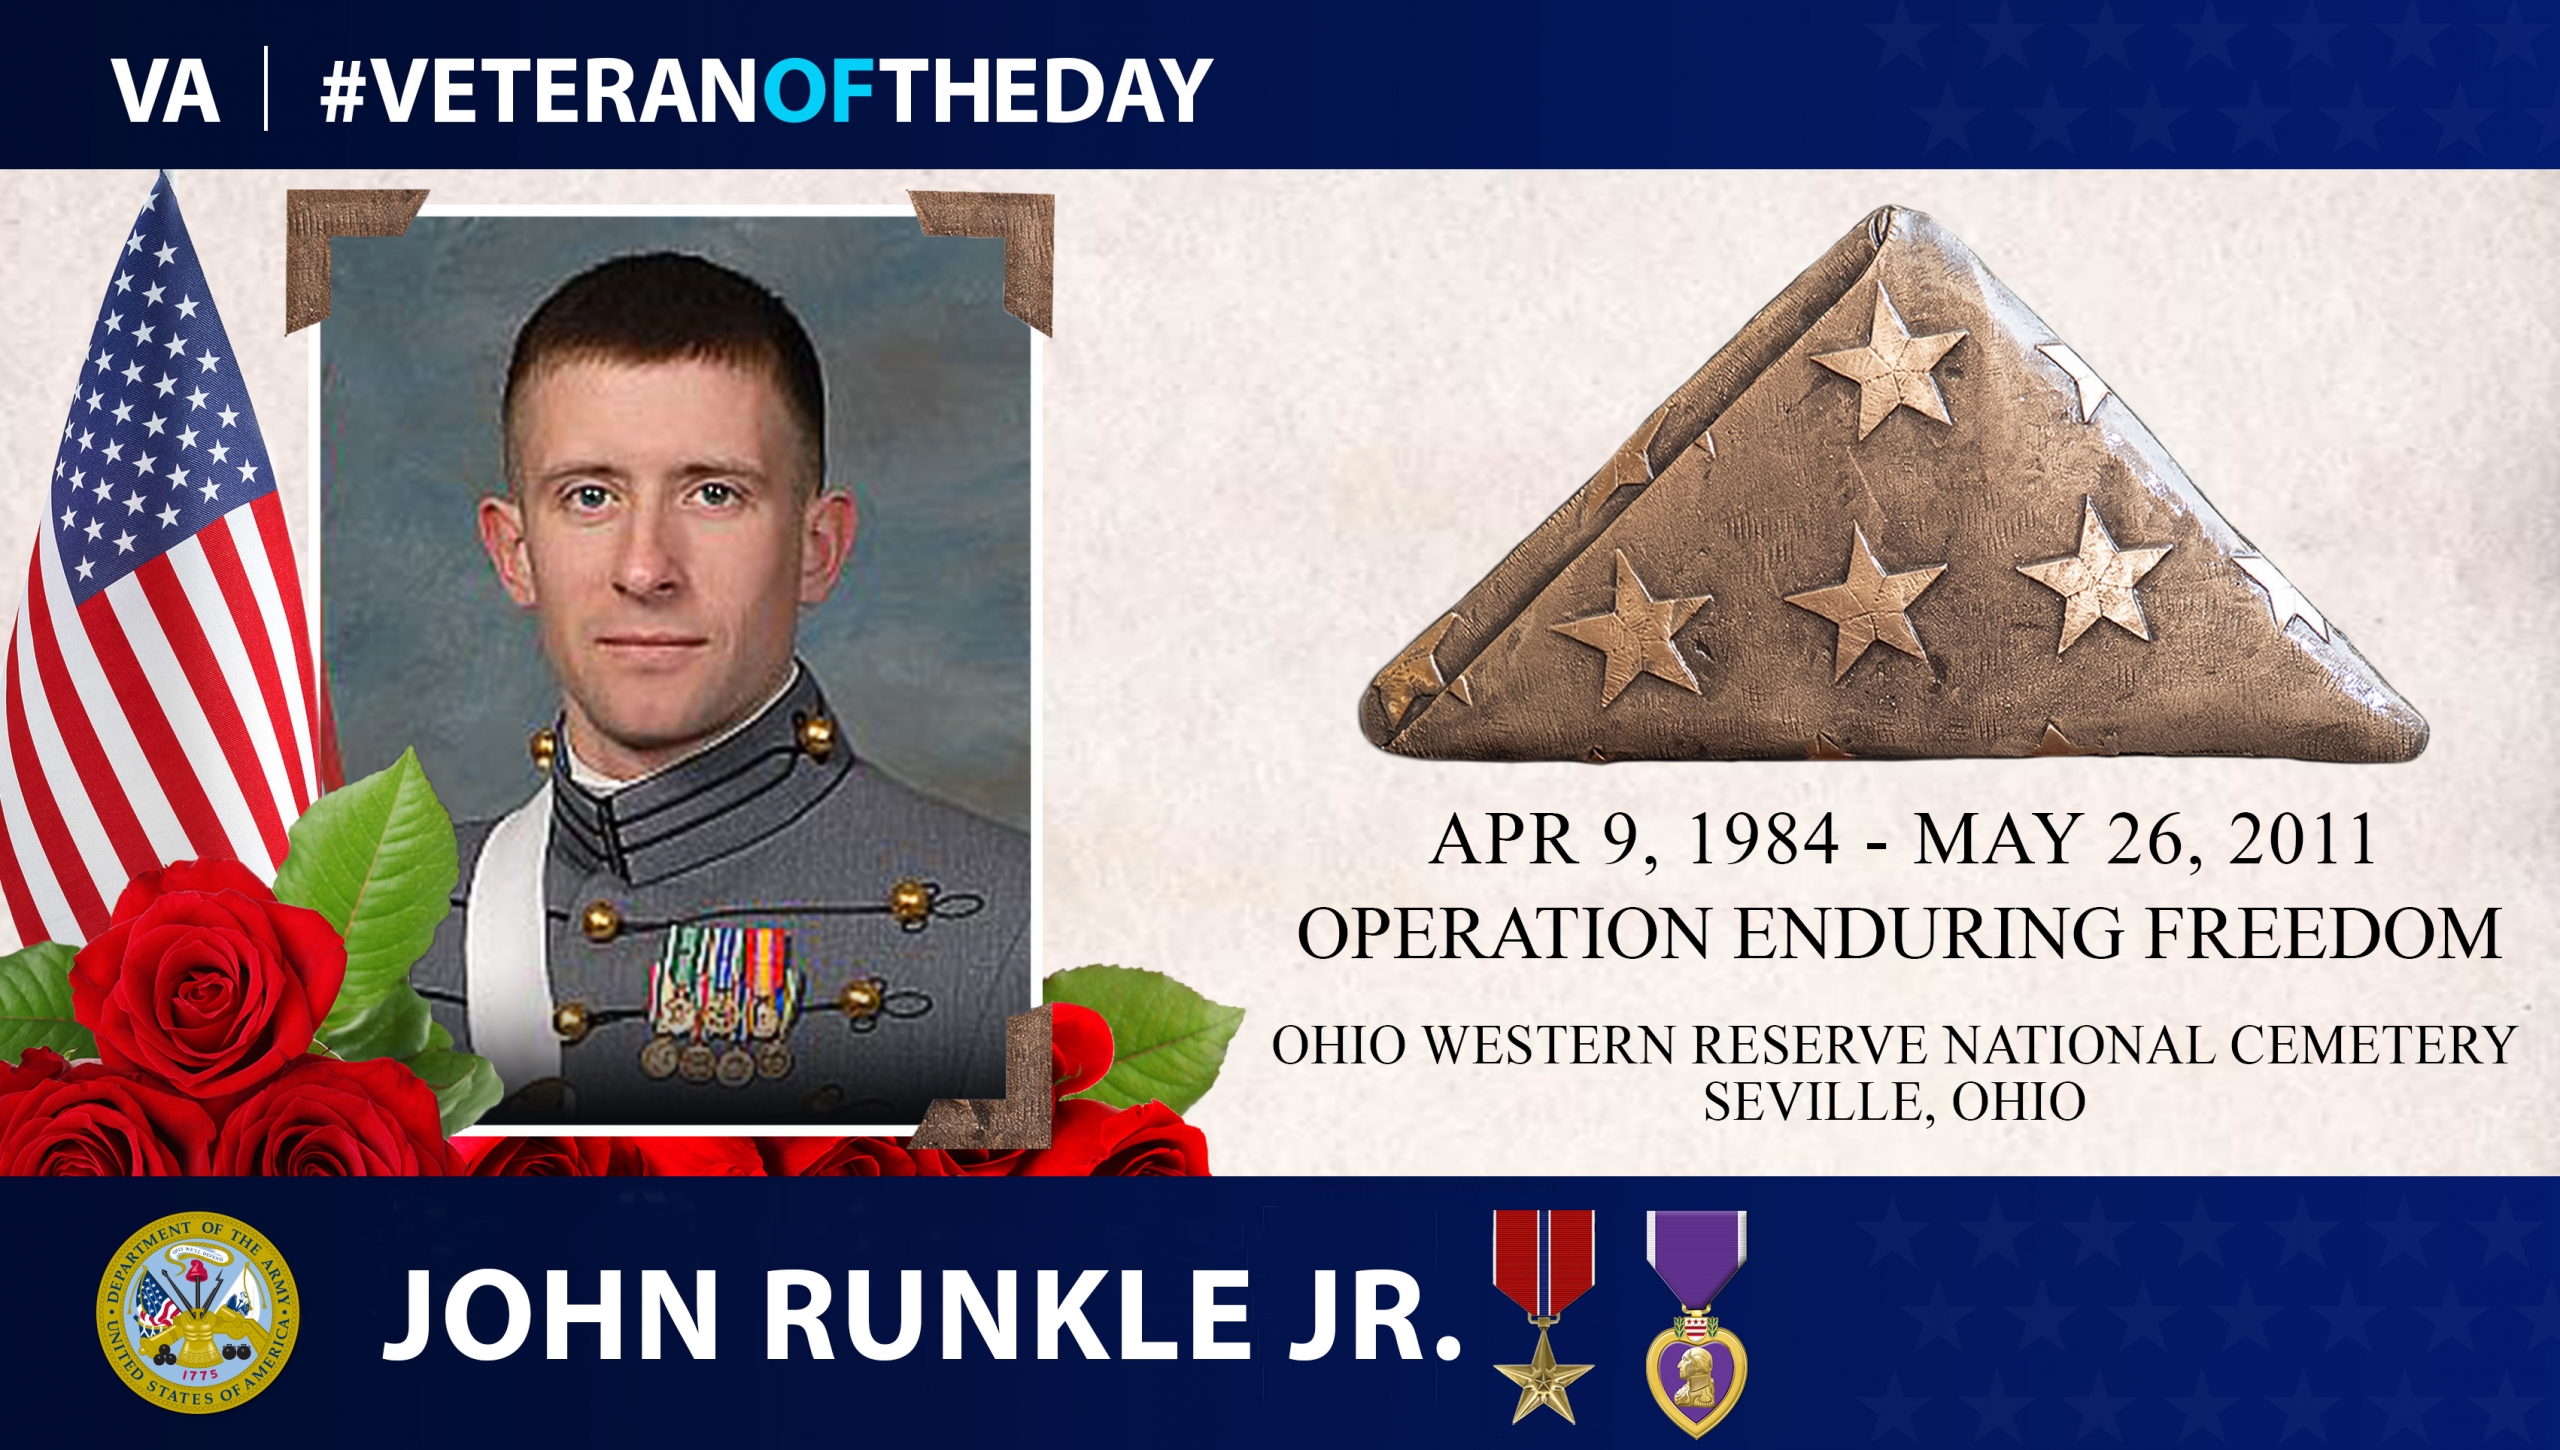 Army Veteran John Marshall Runkle Jr. is today’s Veteran of the Day.